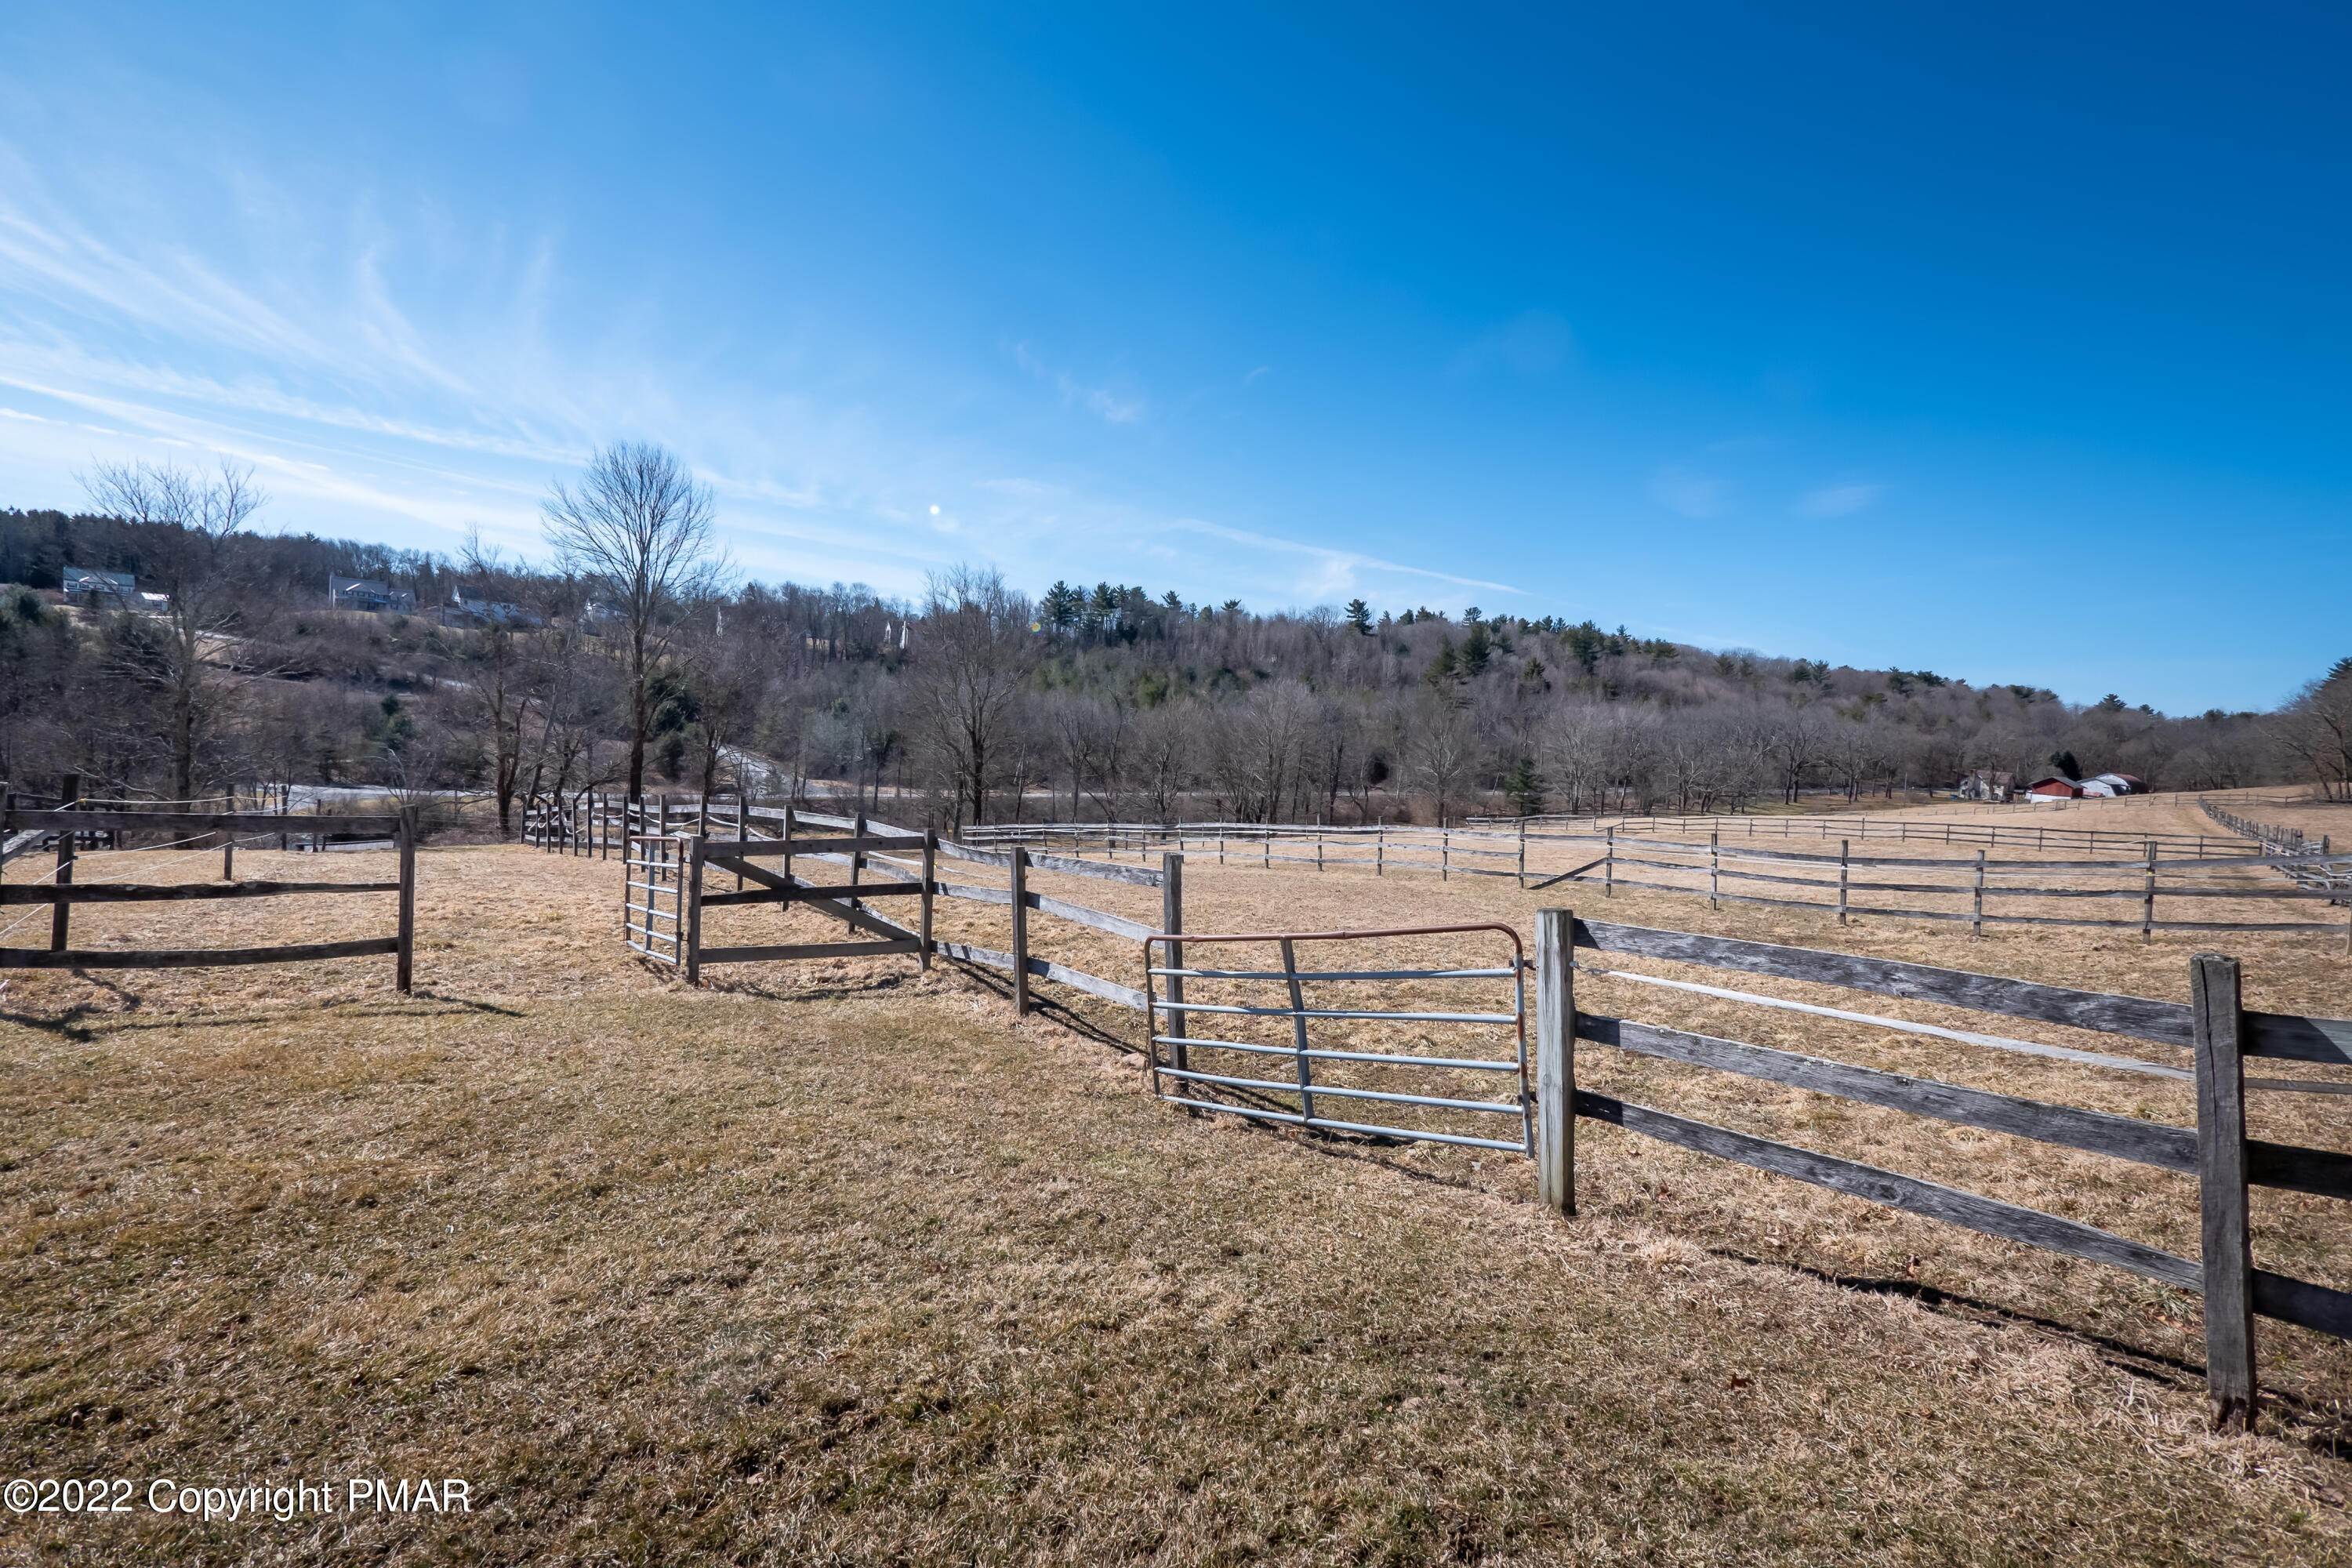 72. Farm and Ranch Properties for Sale at 827 Pheasant Run Rd Effort, Pennsylvania 18330 United States